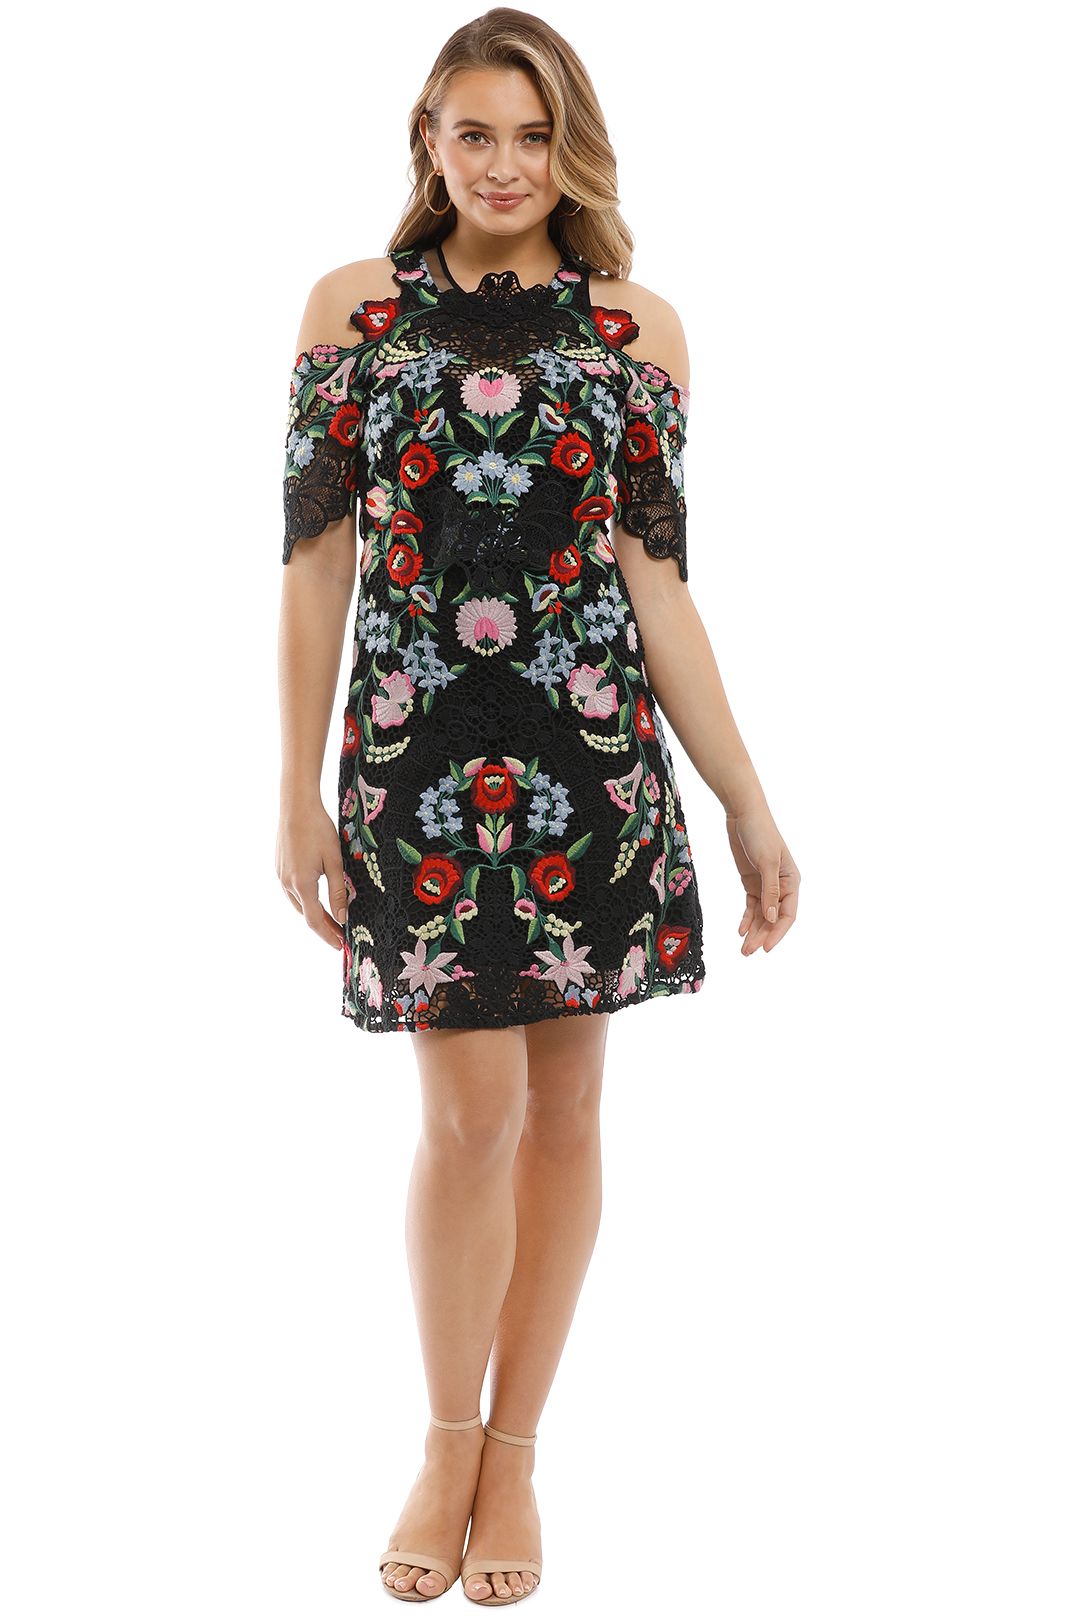 Thurley - Fiesta Dress - Front - Floral